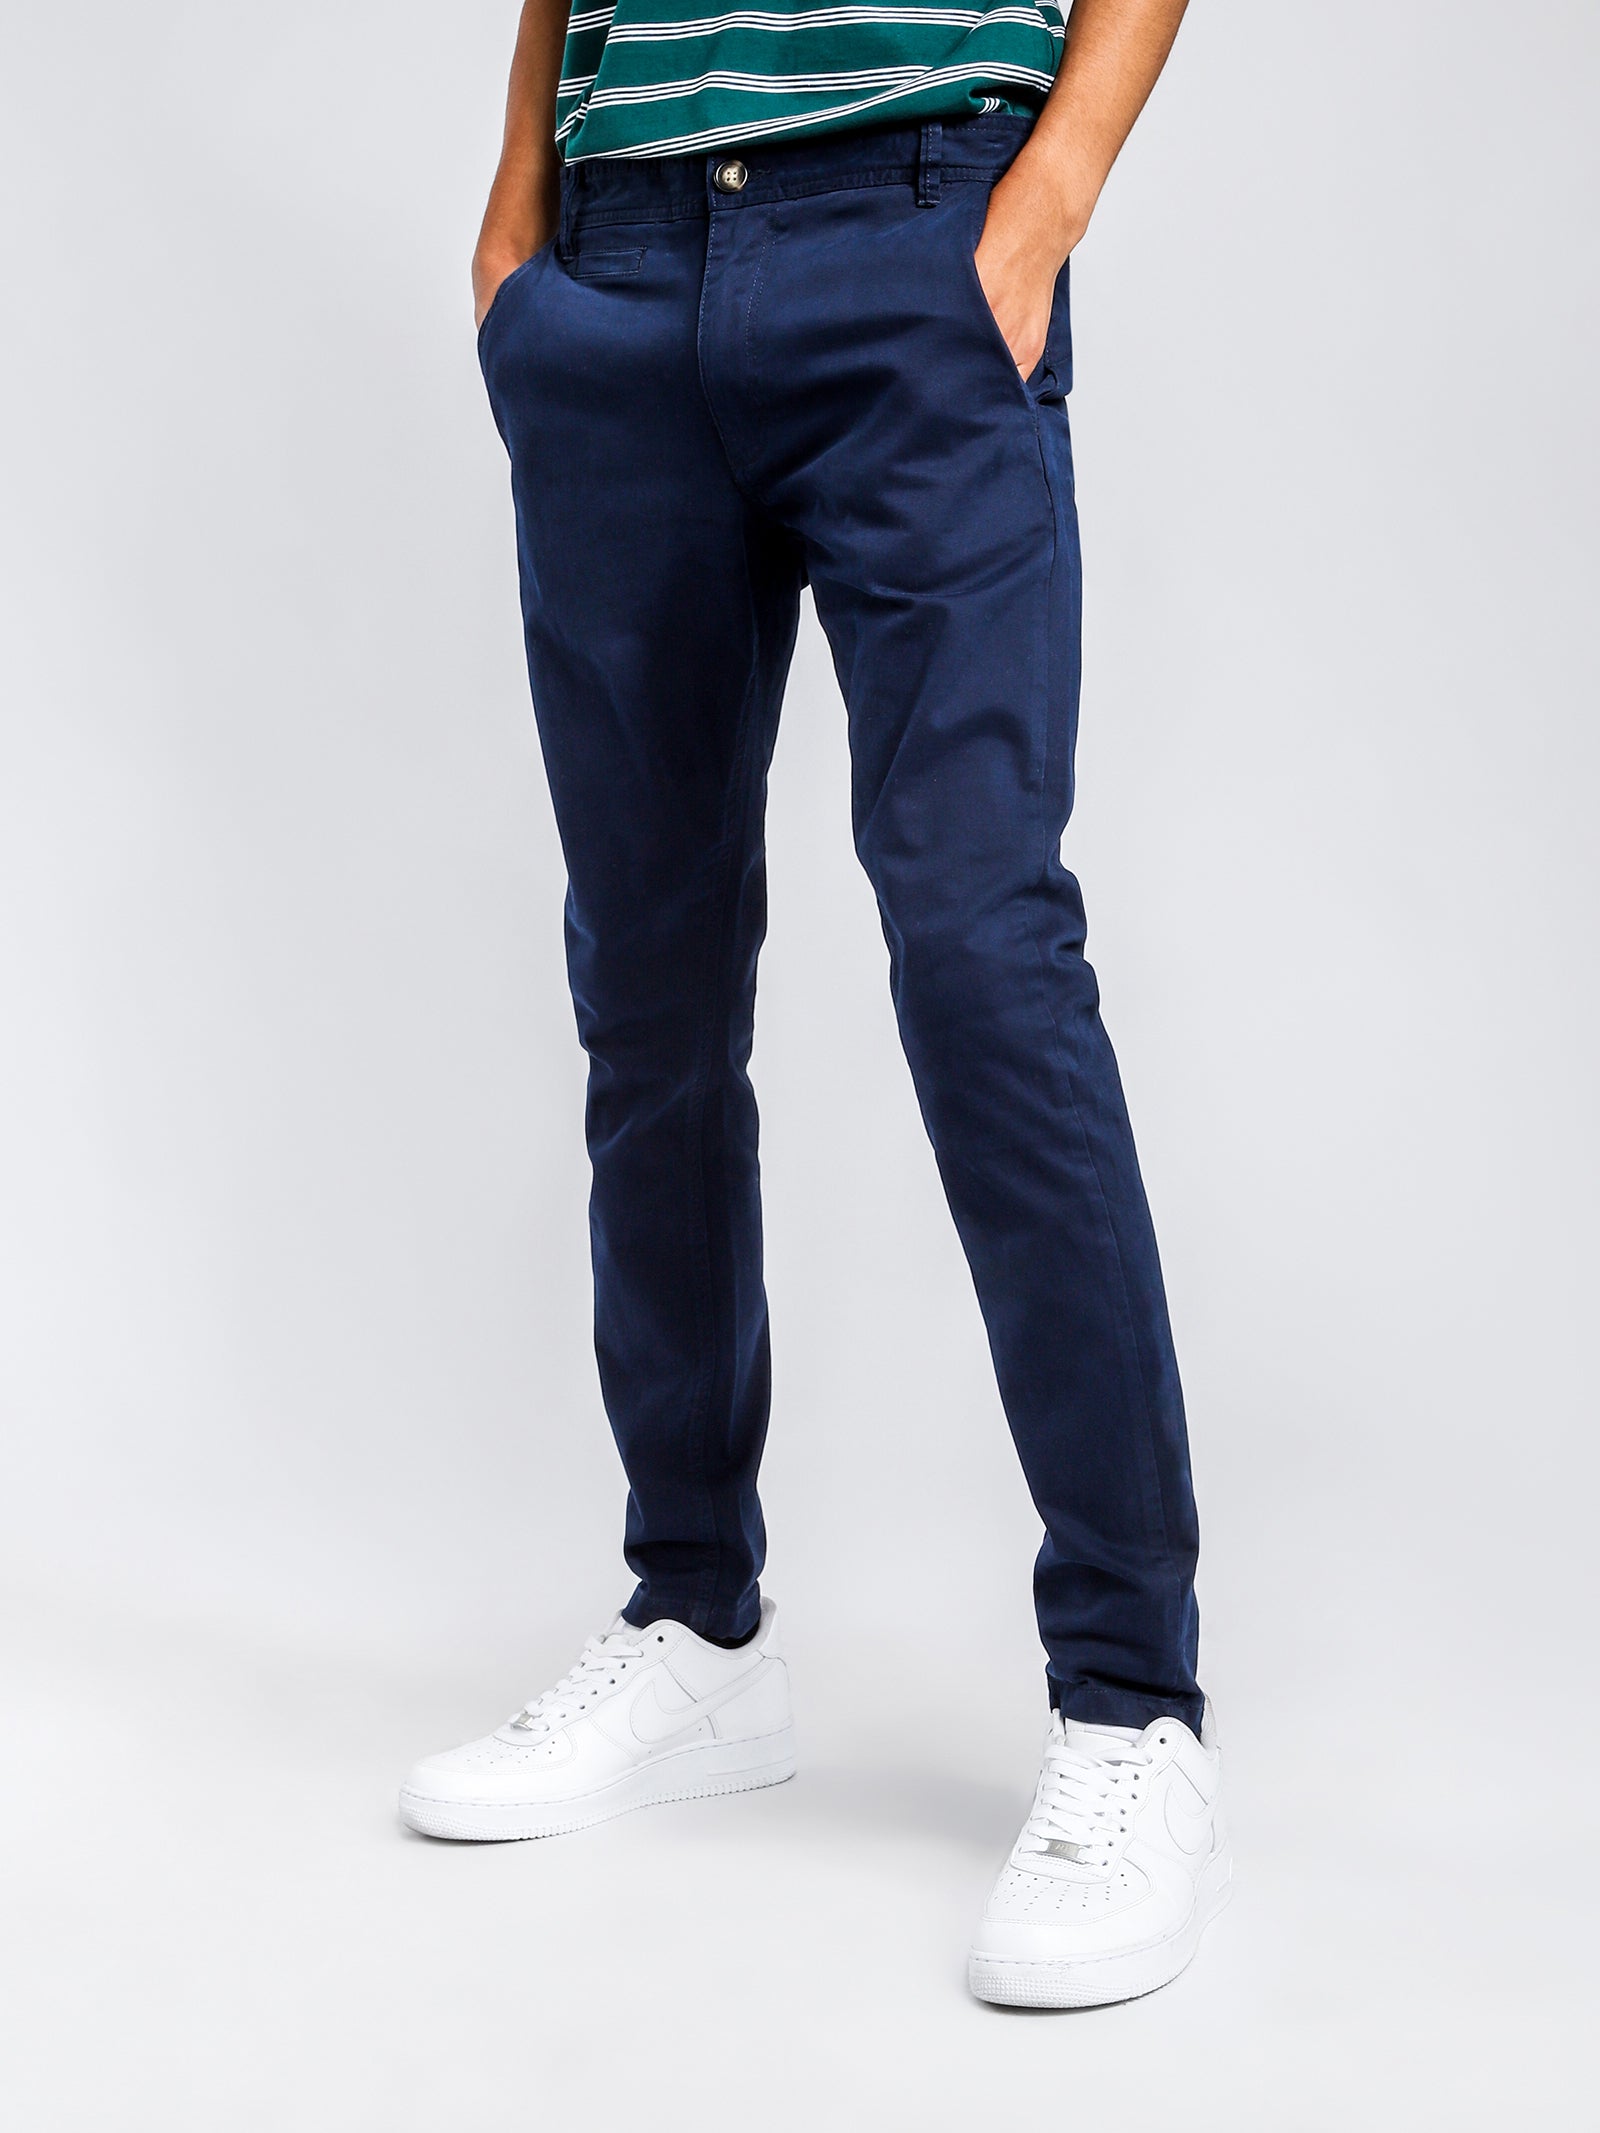 Linden Chino Pants in Navy Blue - Glue 